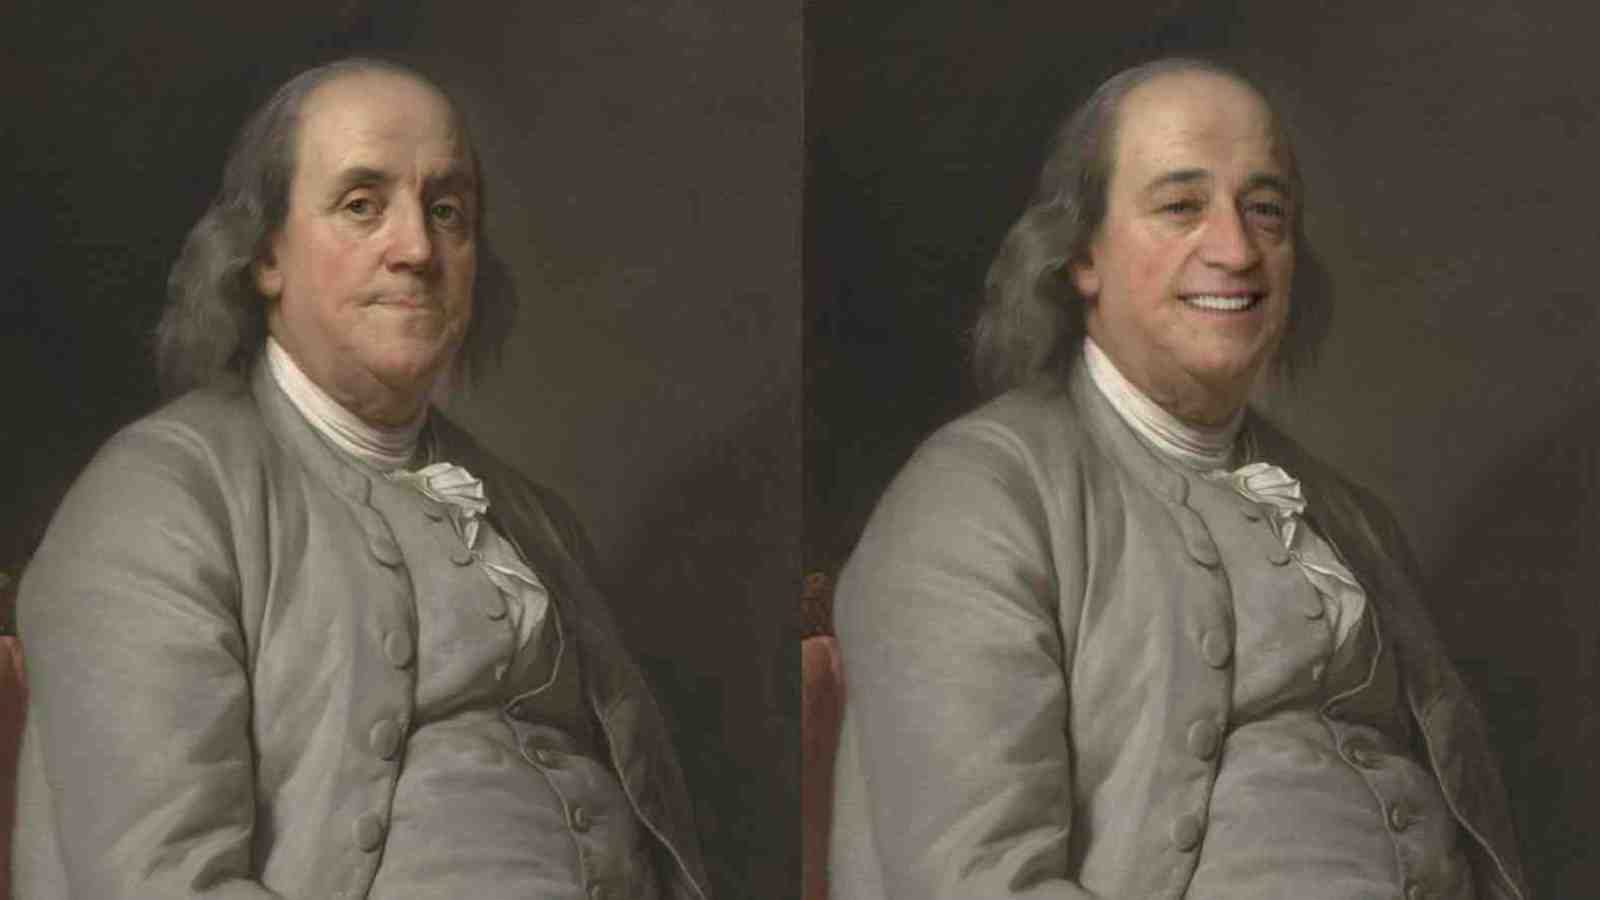 A portrait of Benjamin Franklin on the left and a copy on the right, which has been manipulated by Smilevector so he is smiling.